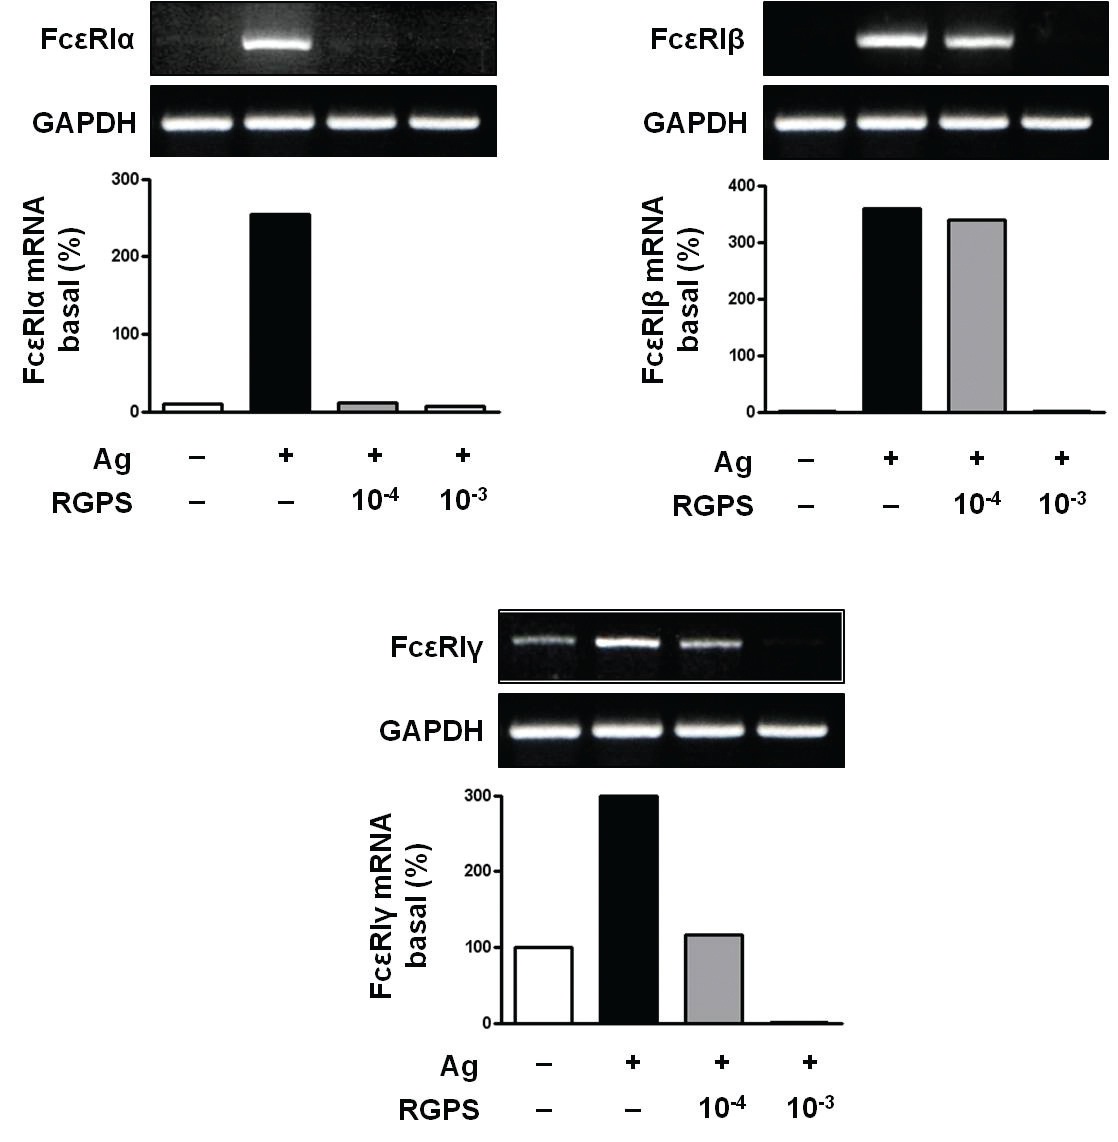 Effects of RGPS on the mRNA expression levels of FcεRIα, FcεRIβ and FcεRIγ, in IgE/Ag-stimulated RBL-2H3 cells. IgE-sensitized cells were treated with RGPS (10-4 and 10-3 dilution) for 1 h and stimulated with DNP-HSA for 4 h. Detection of mRNA was examined by using RT-PCR analyses. GAPDH was used as an internal control gene.